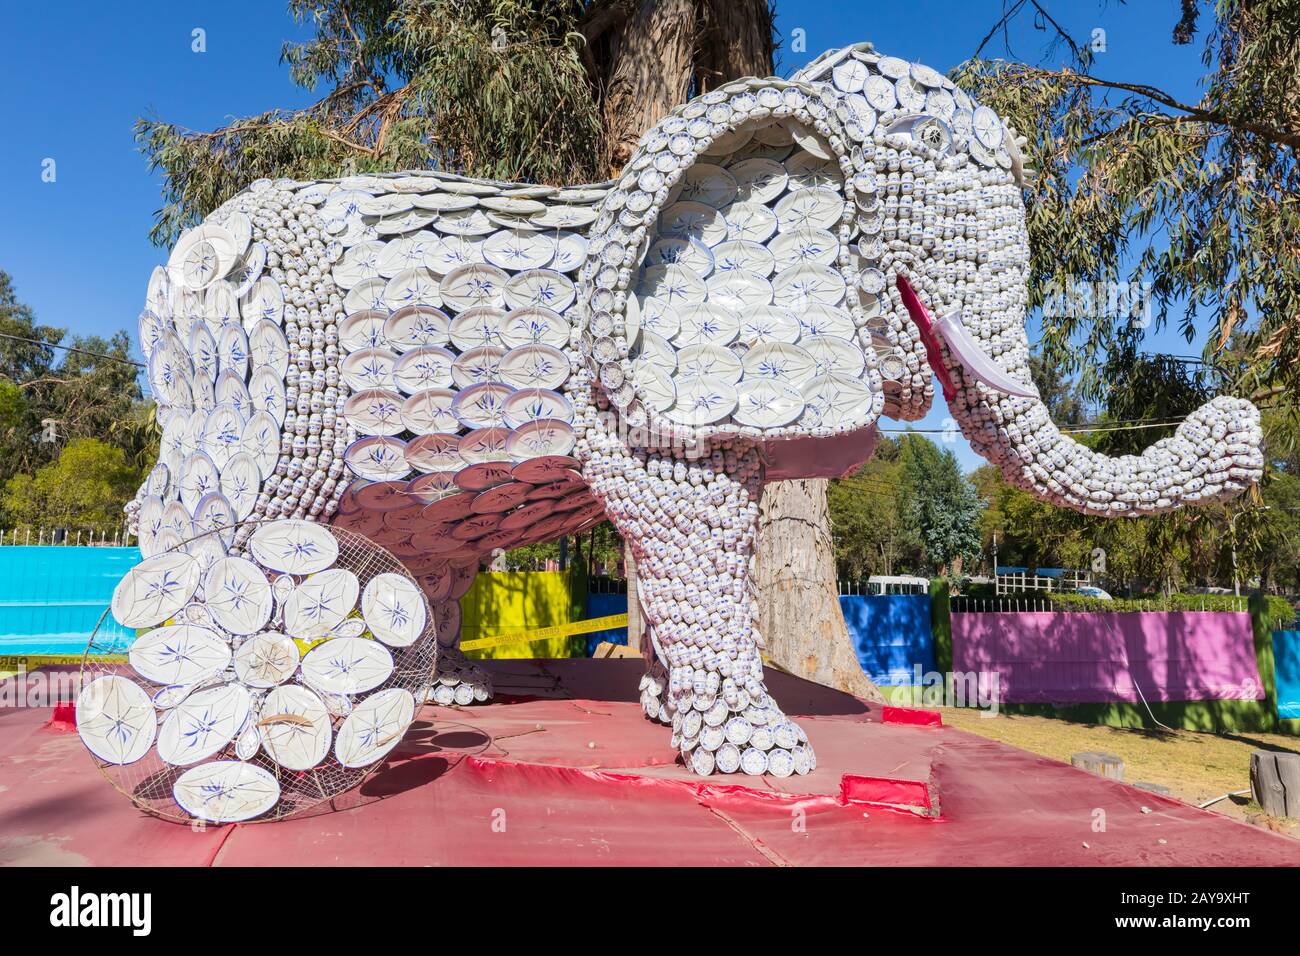 Chinese sculpture in the form of elephant park Selva Alegre Arequipa Peru Stock Photo